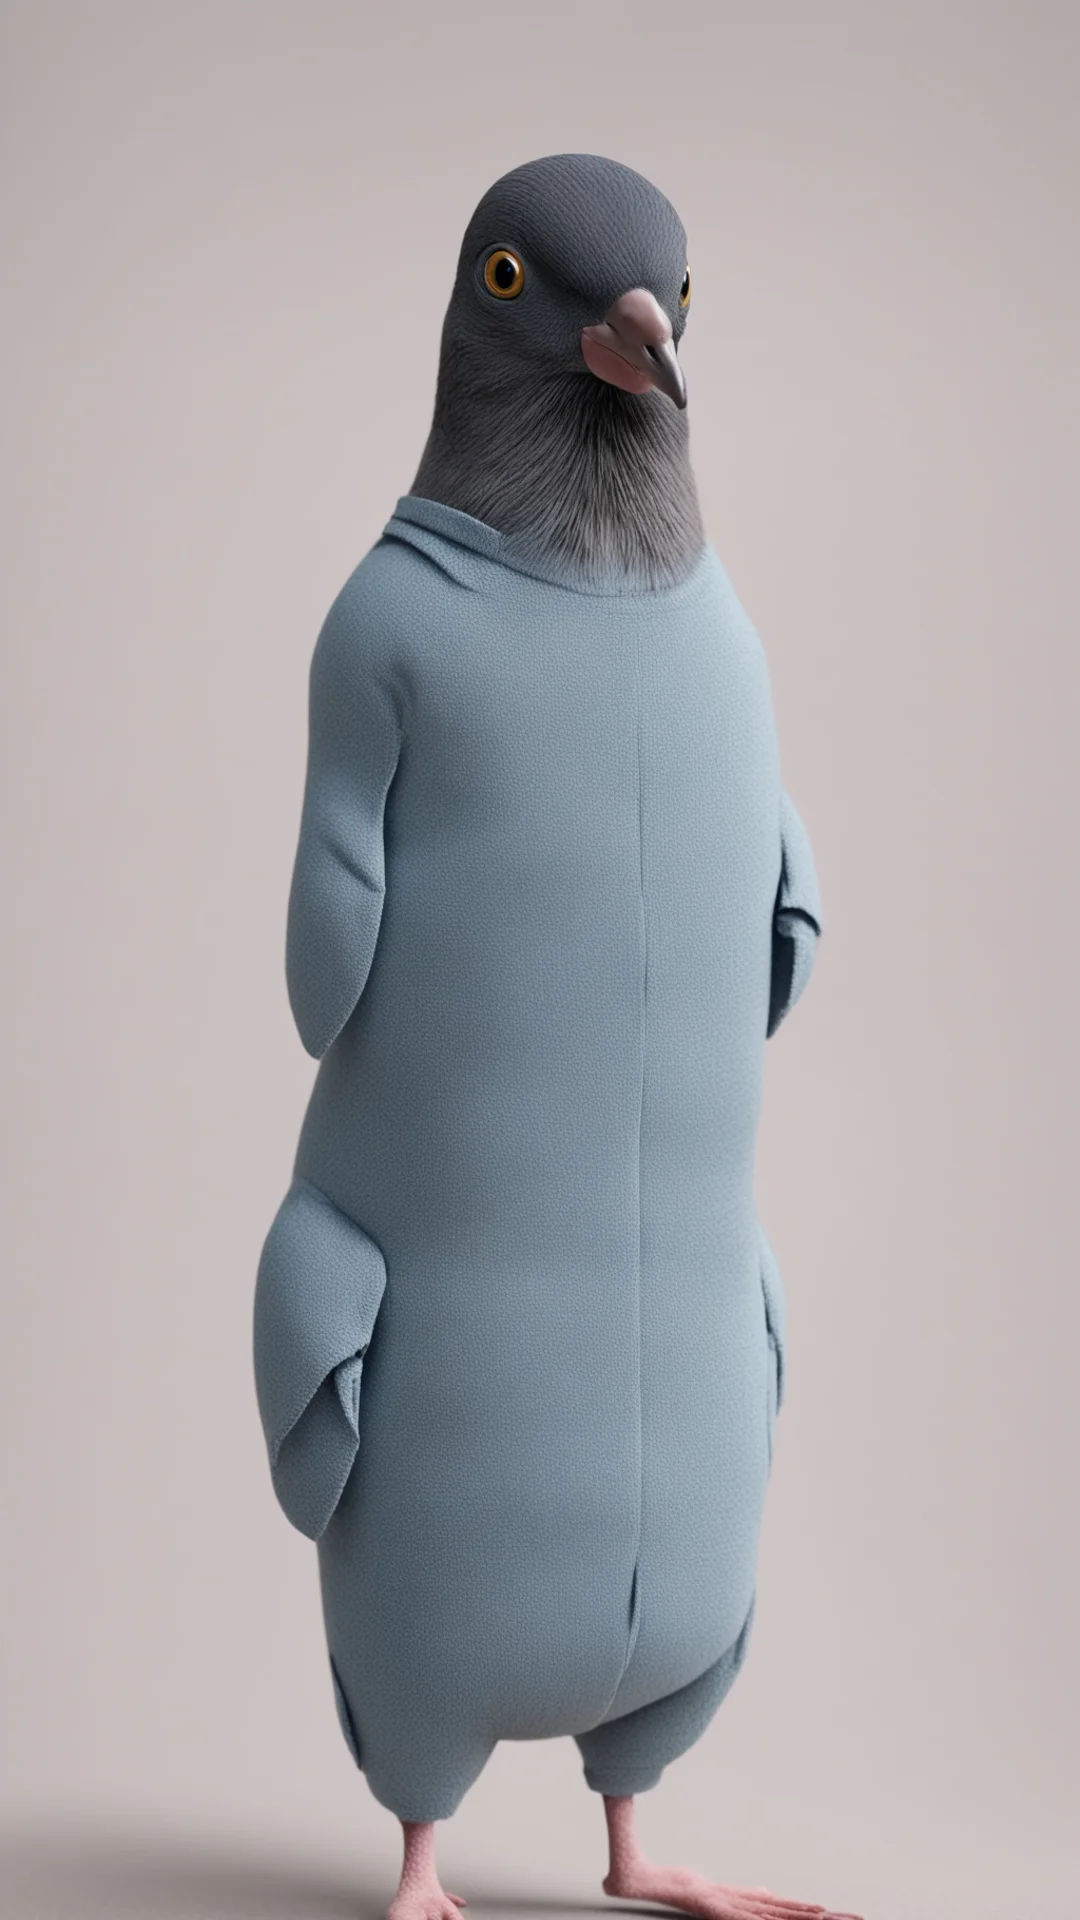 amazing a pigeon wearing a tracksuit in a stop motion movie awesome portrait 2 tall